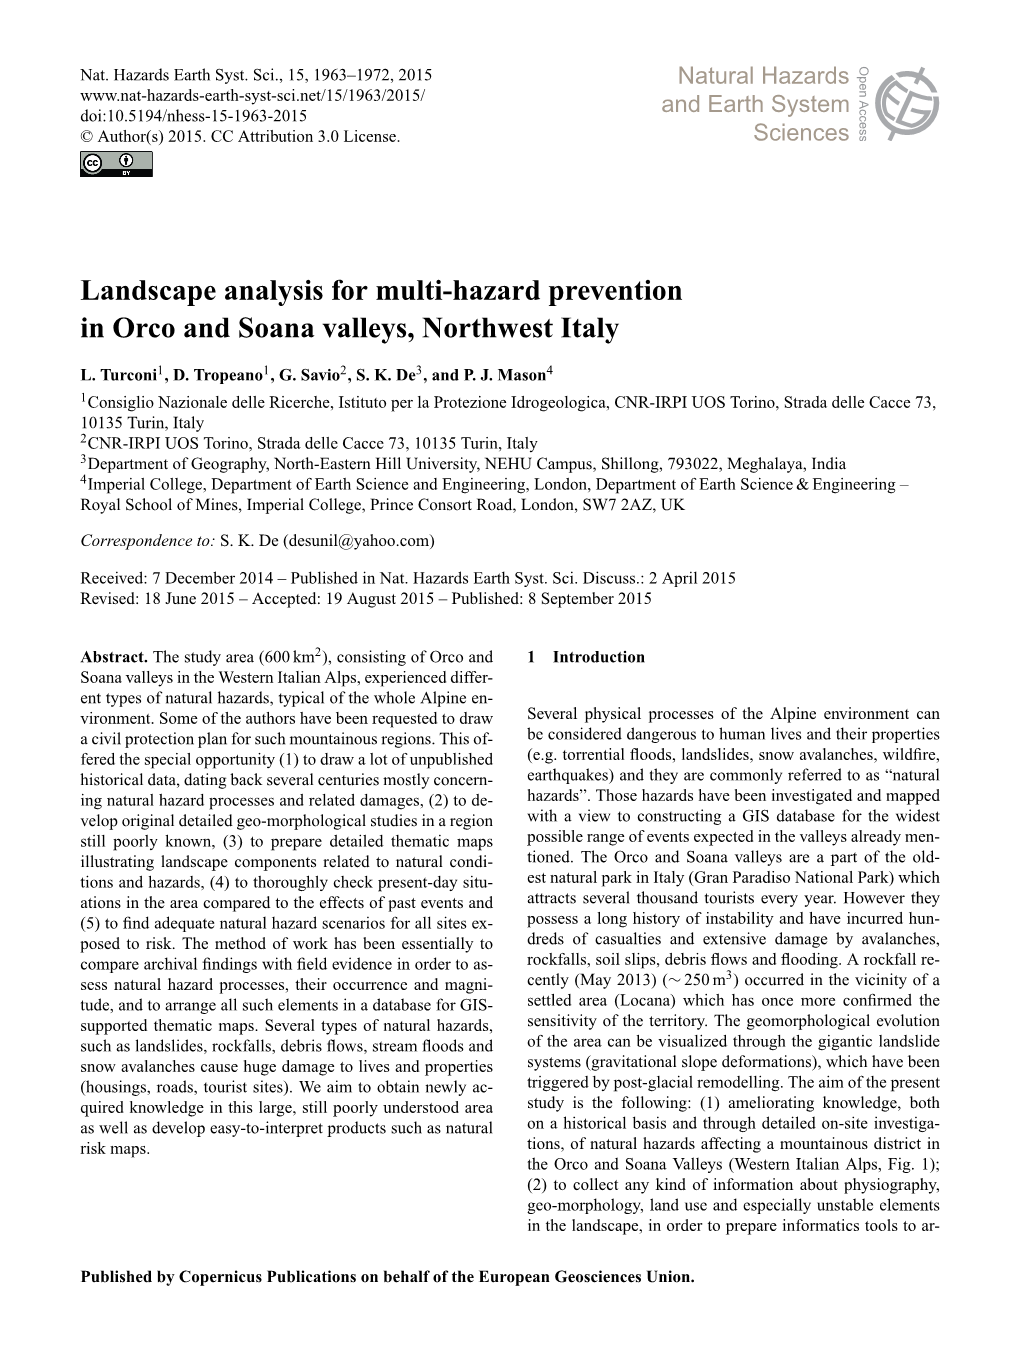 Landscape Analysis for Multi-Hazard Prevention in Orco and Soana Valleys, Northwest Italy